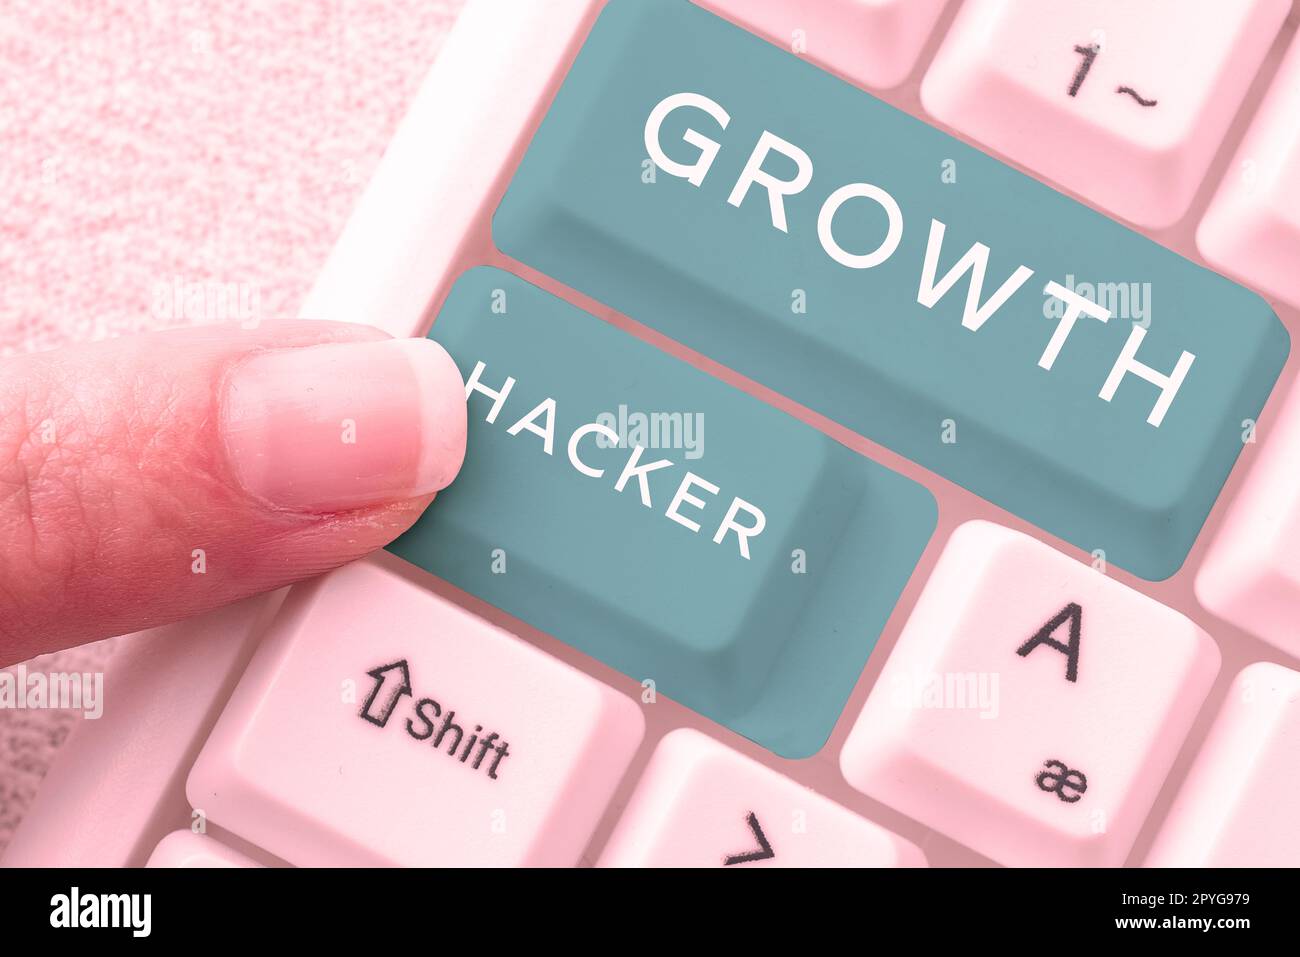 Hand writing sign Growth Hacker. Business approach generally to acquire as many users or customers as possible Stock Photo